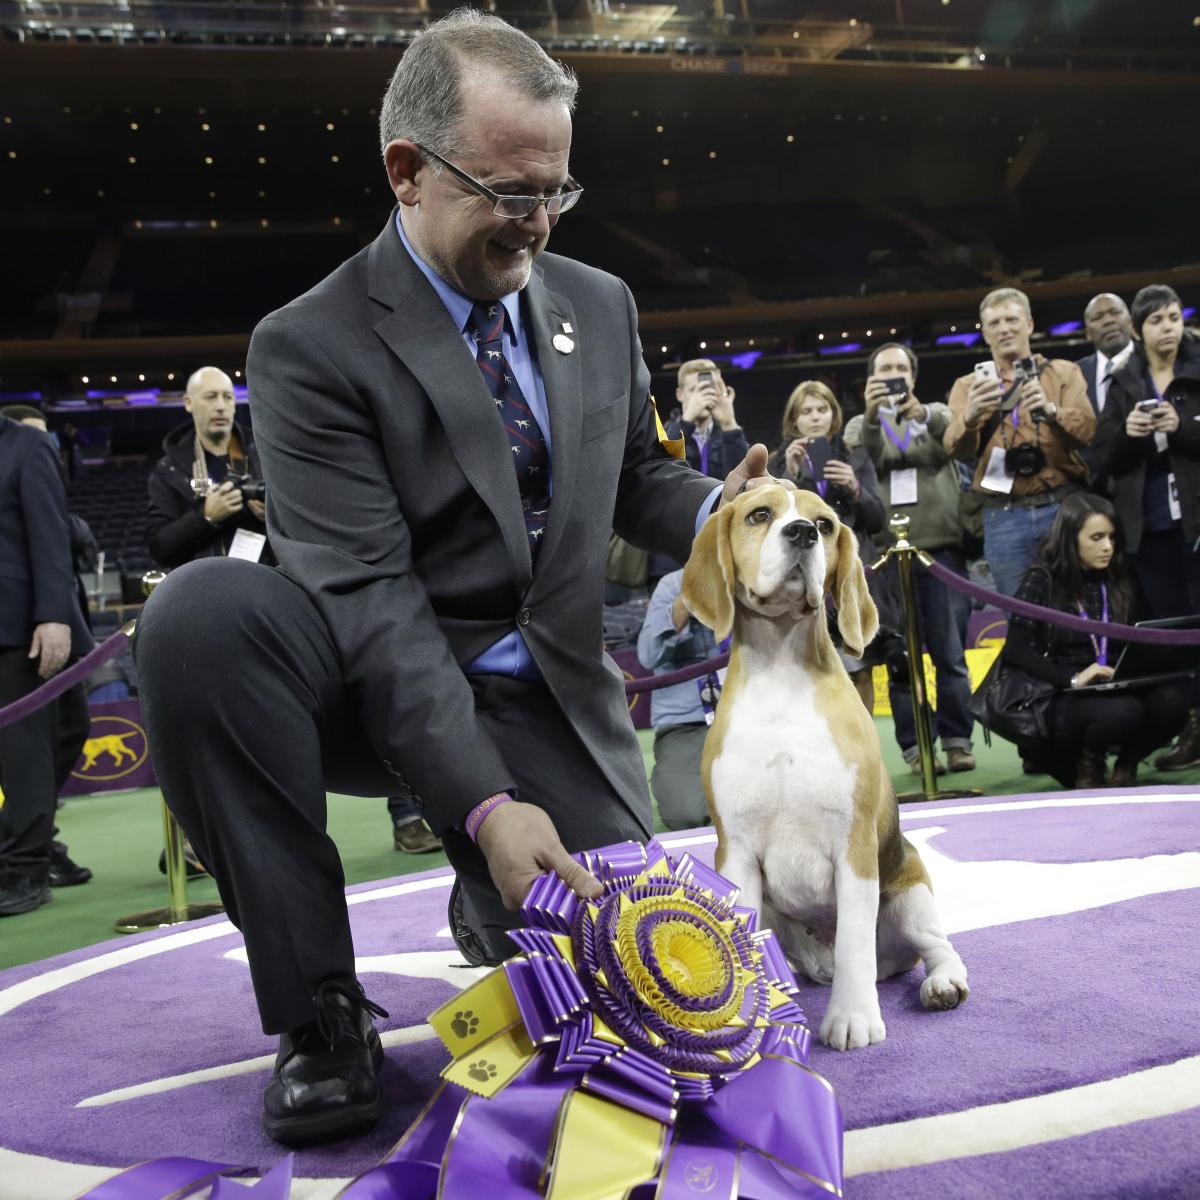 Westminster Dog Show 2015 Results: Best of Breed Winners and Day 2 ...